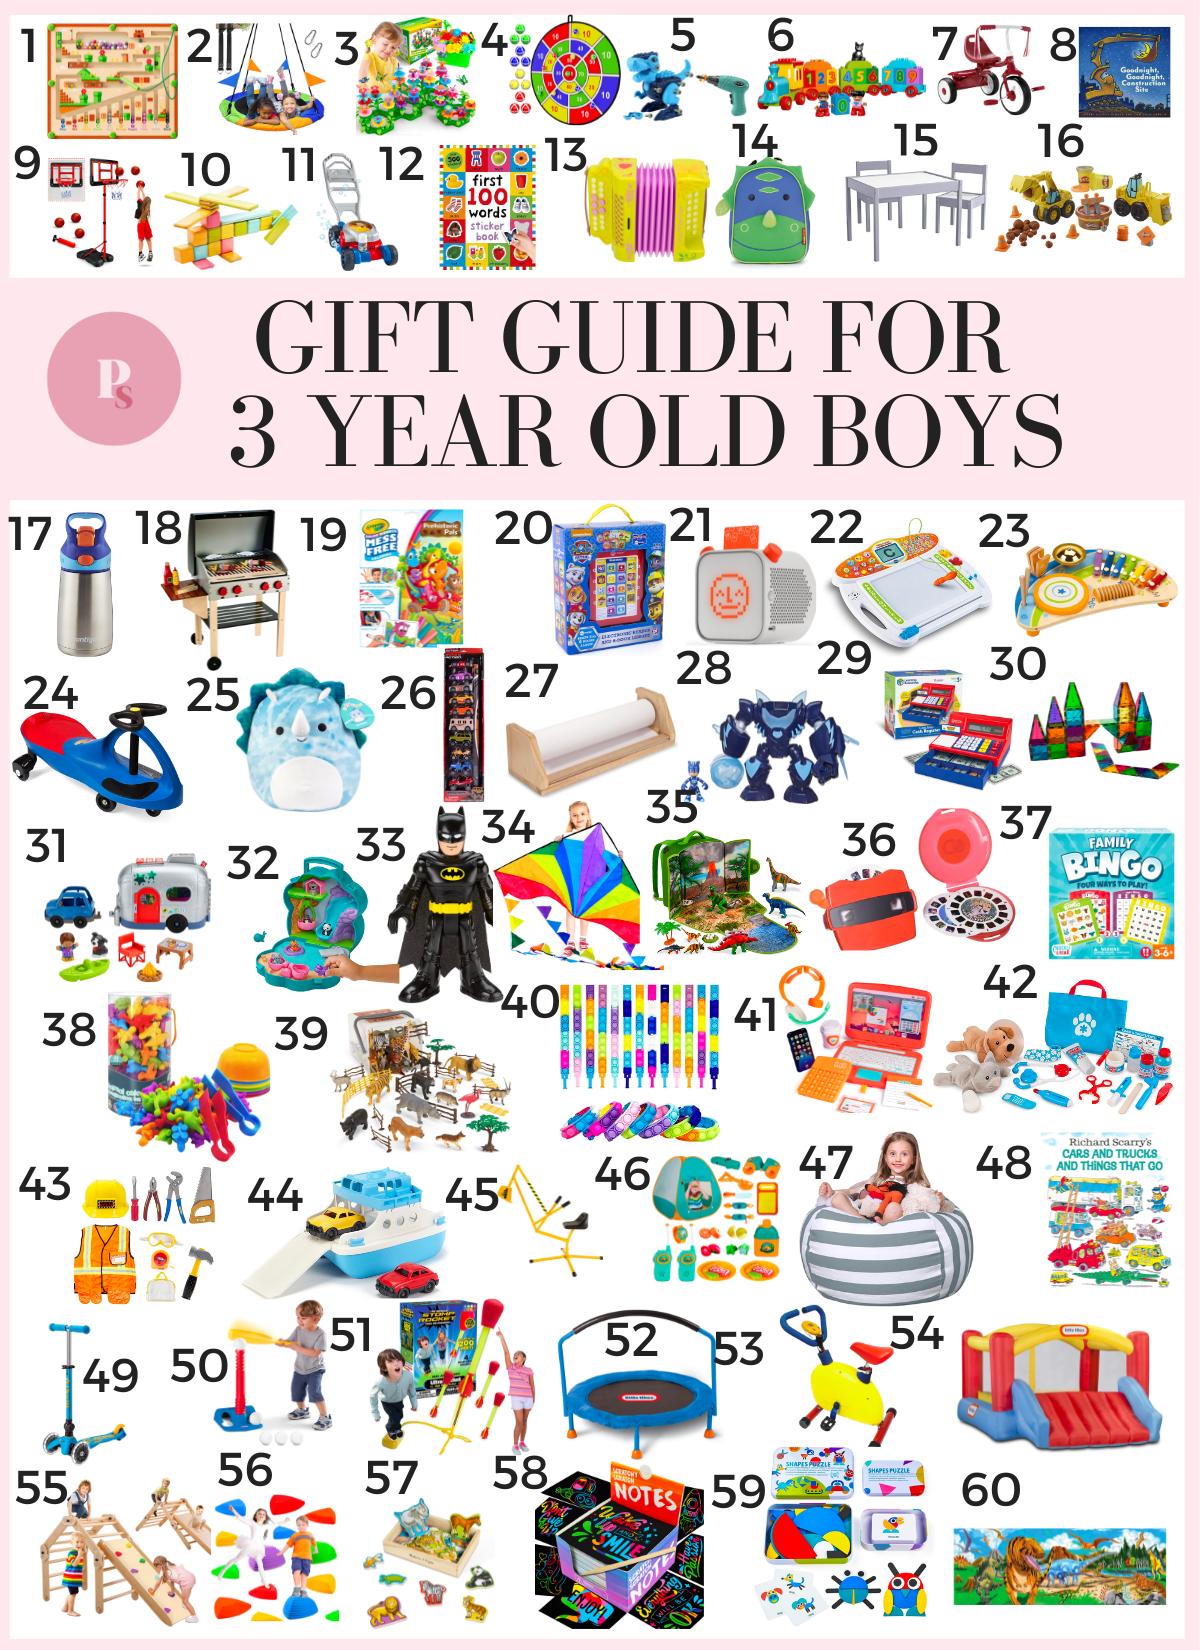 Best Gifts for 11-Year-Old Boys - The Tech Edvocate